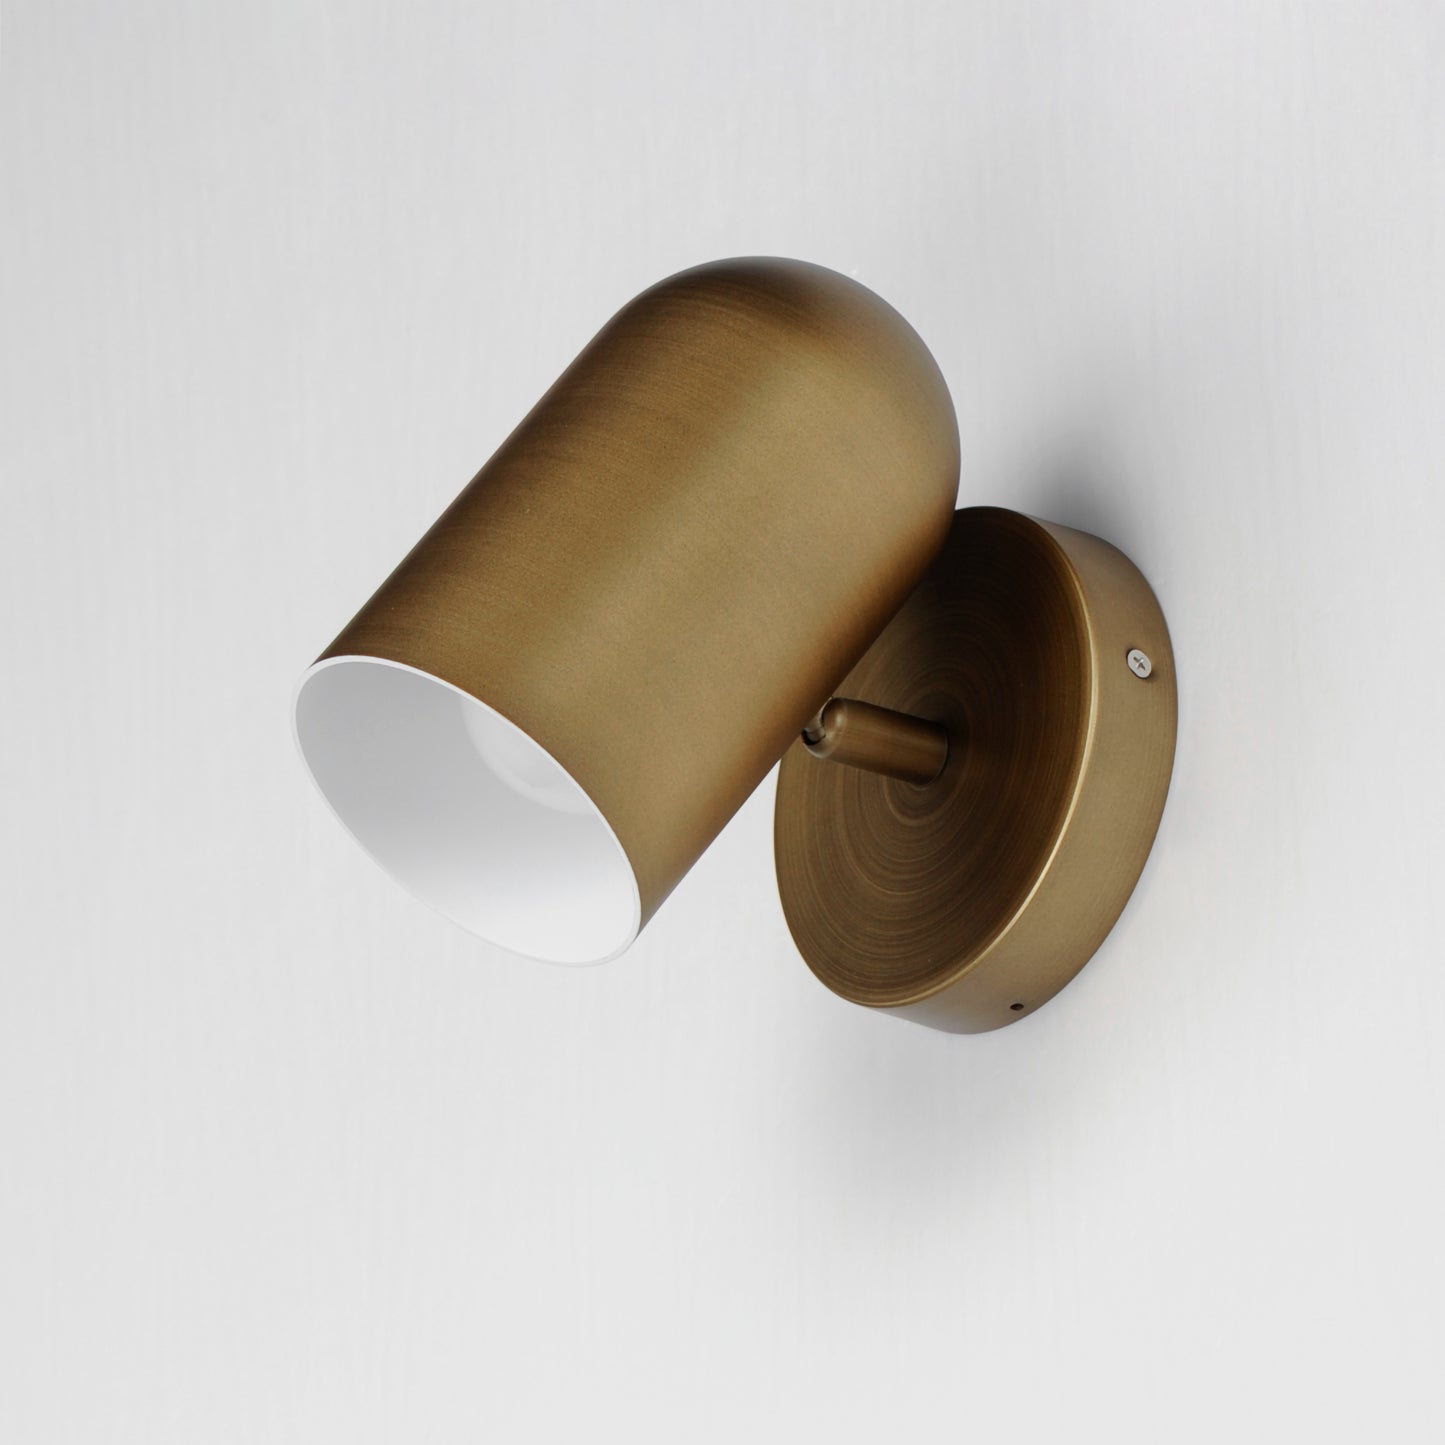 62003NAB - Spot Light 6.5" Outdoor Wall Sconce - Natural Aged Brass